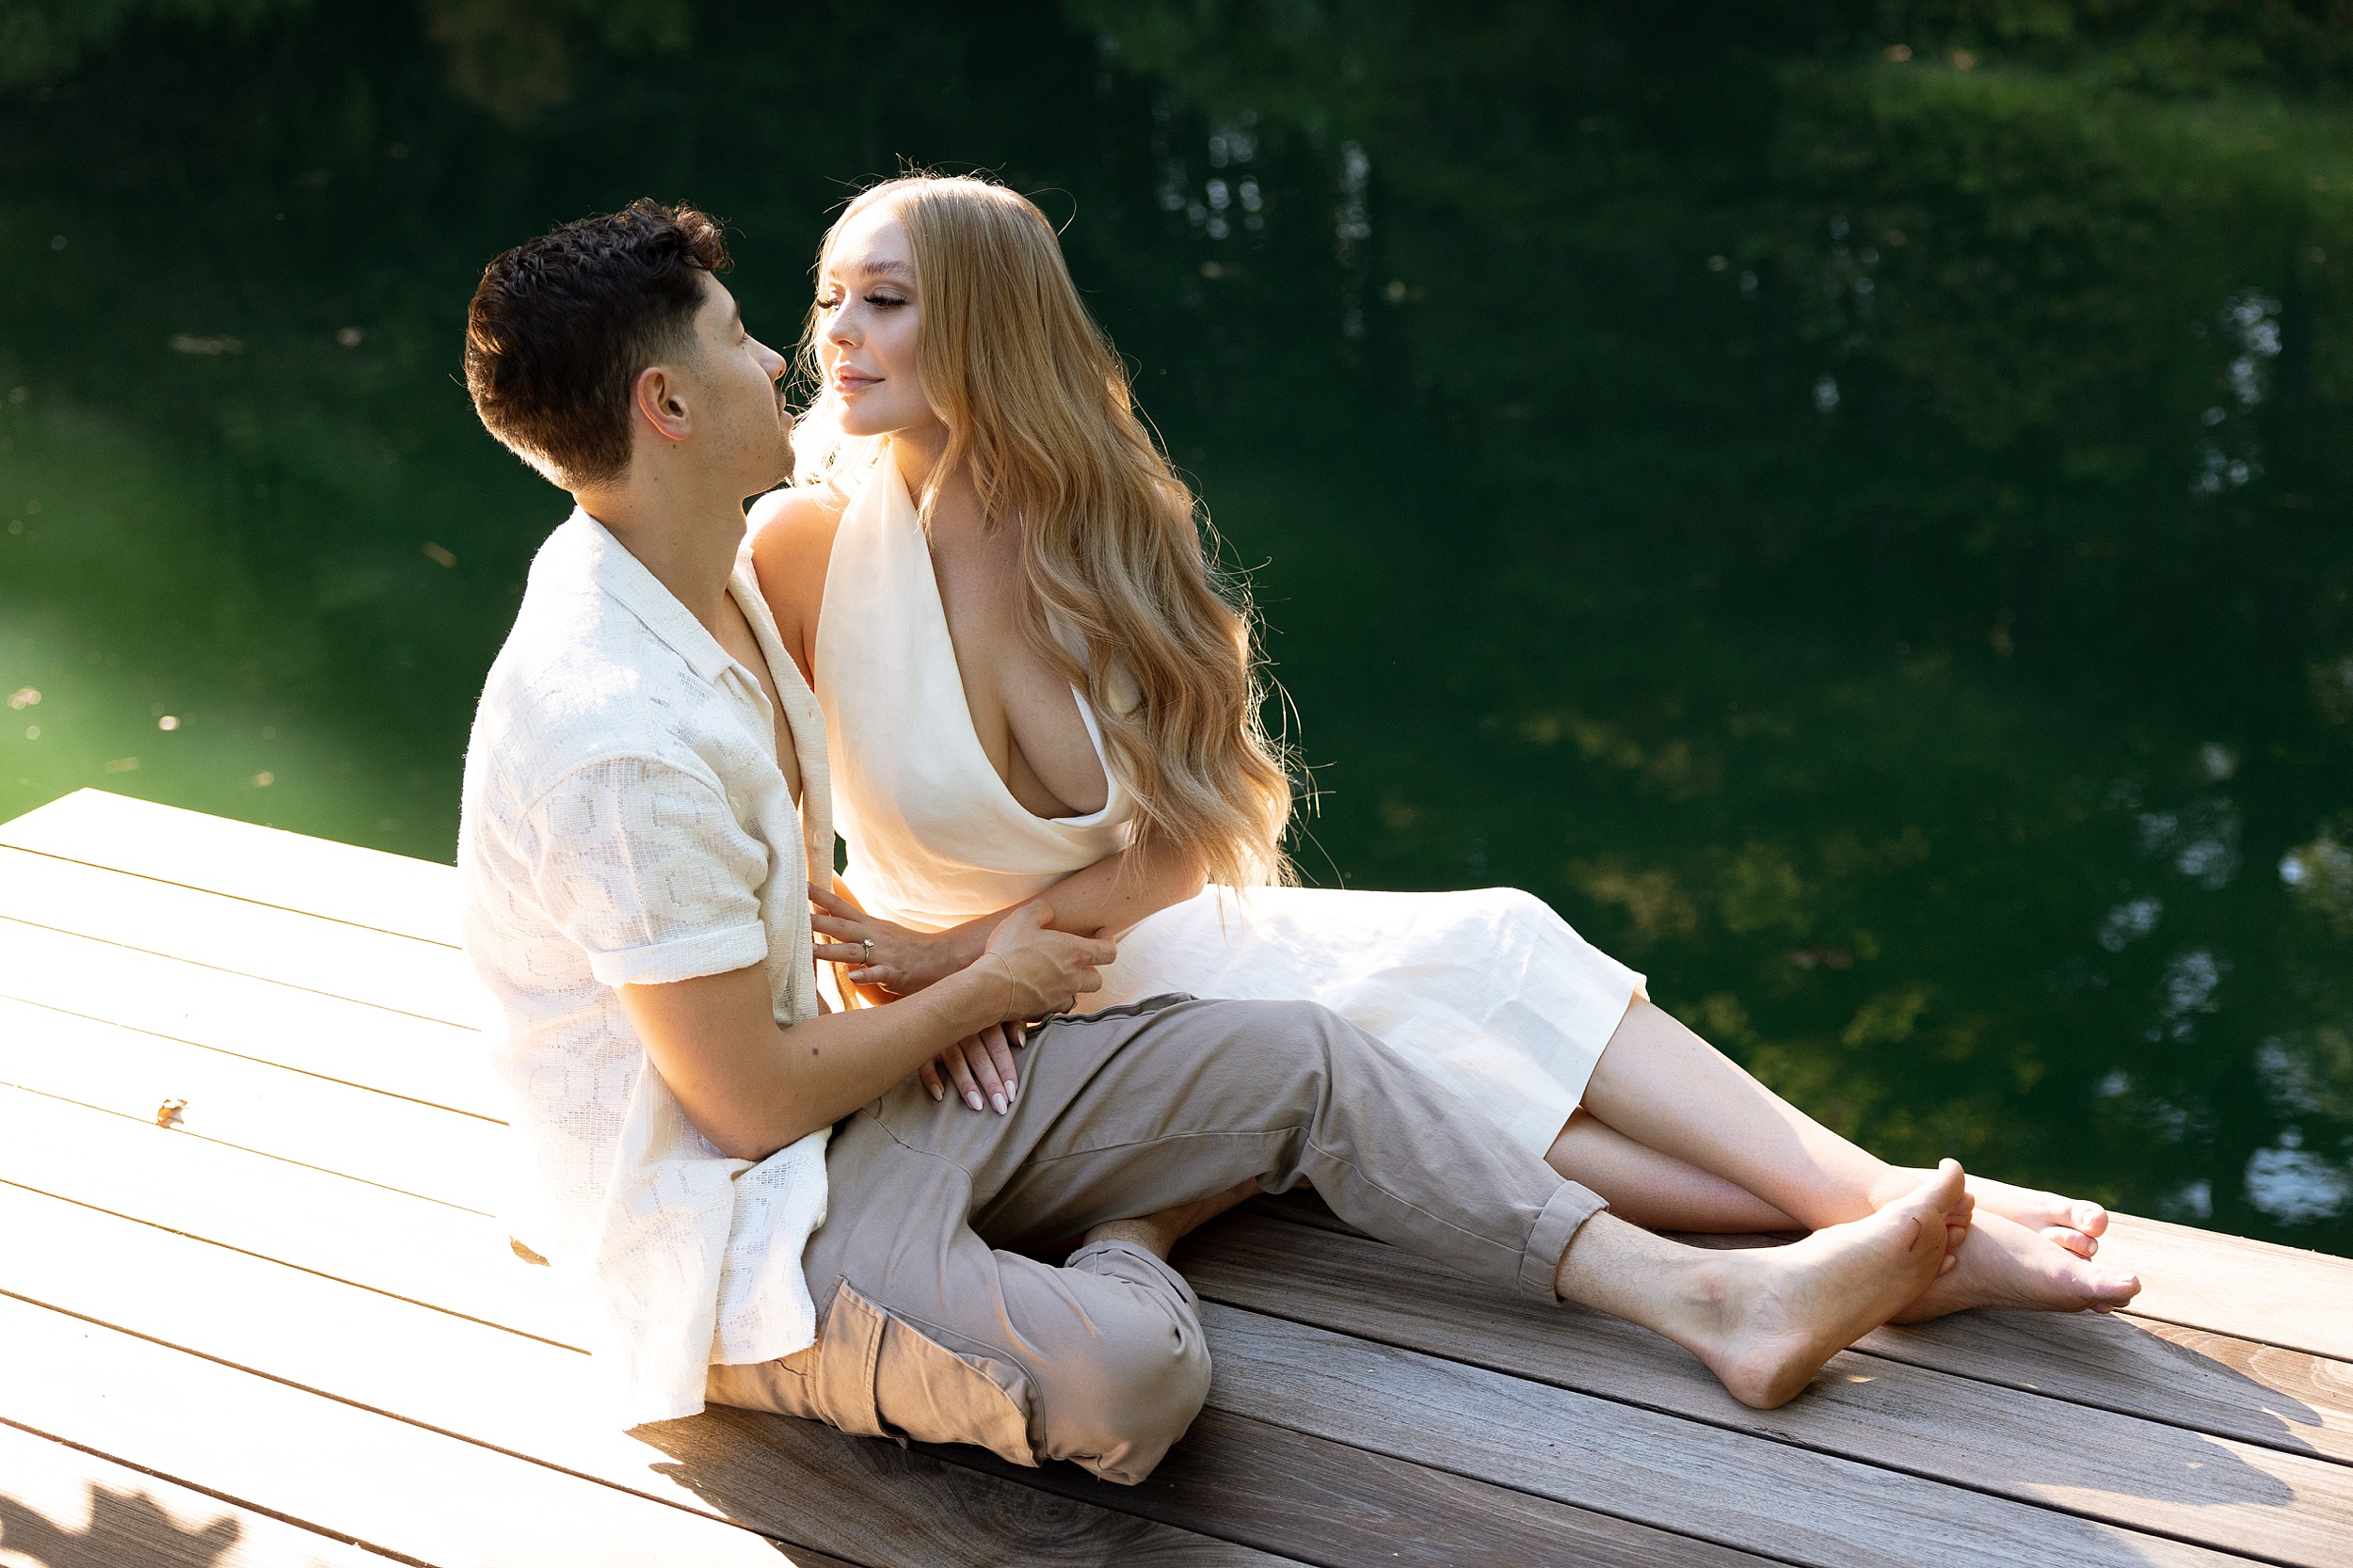 lake engagement photos with scenic greenery trees and a man and woman laying on a dock